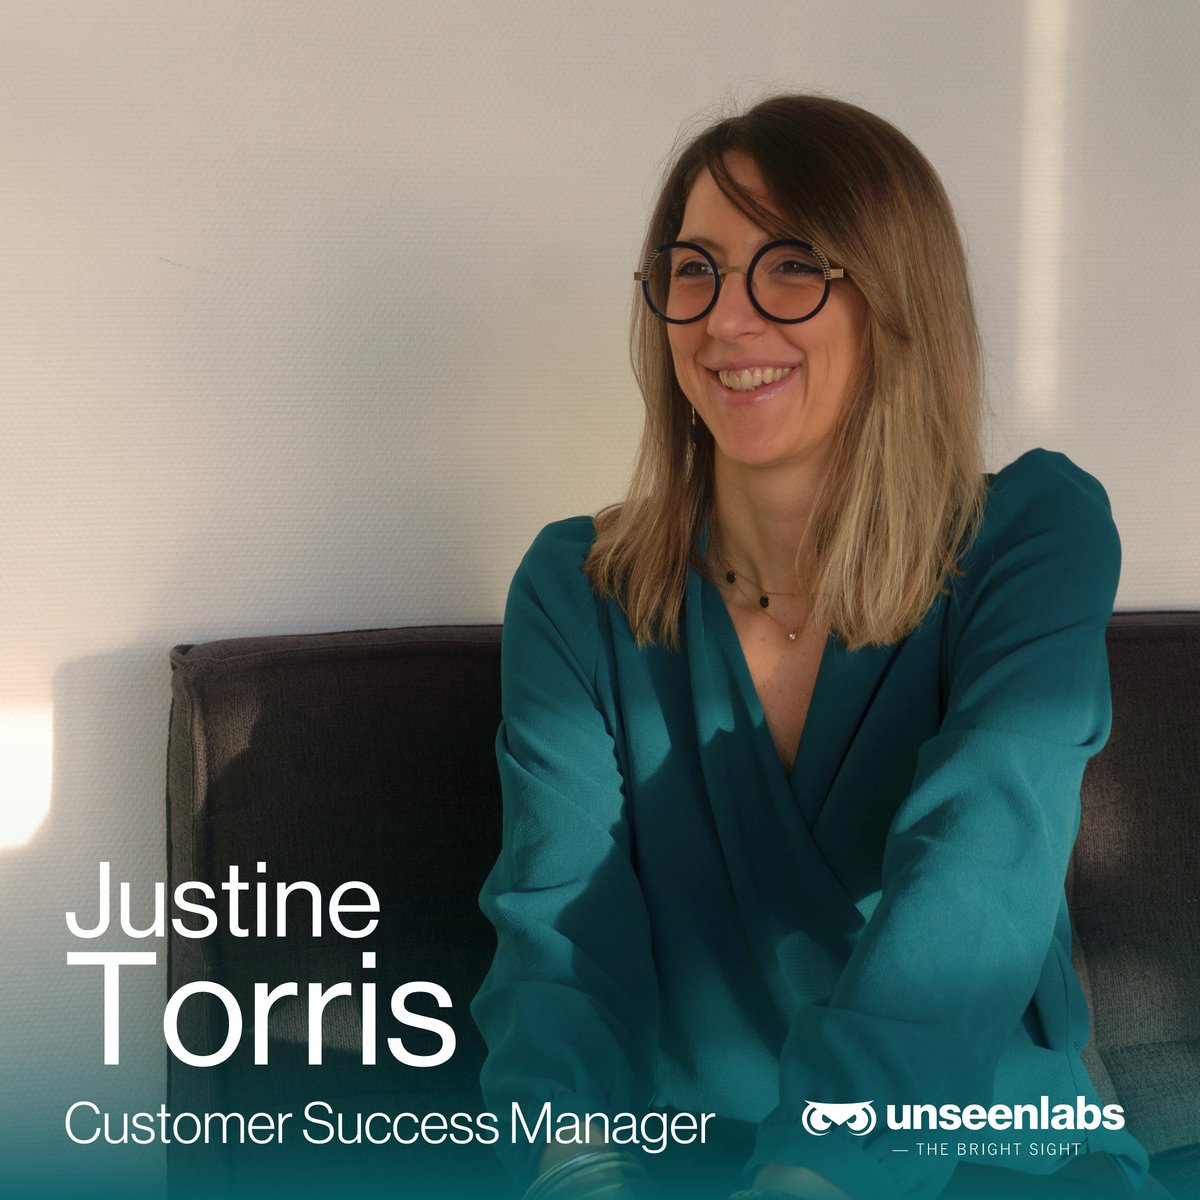 💼 We’re happy to welcome Justine Torris to the Unseenlabs team as our Customer Success Manager! We’re eager to see how her contributions will amplify our market presence and propel us toward new achievements soon. Welcome to Unseenlabs, Justine! 🚀 #TheUnseenlabsTeam